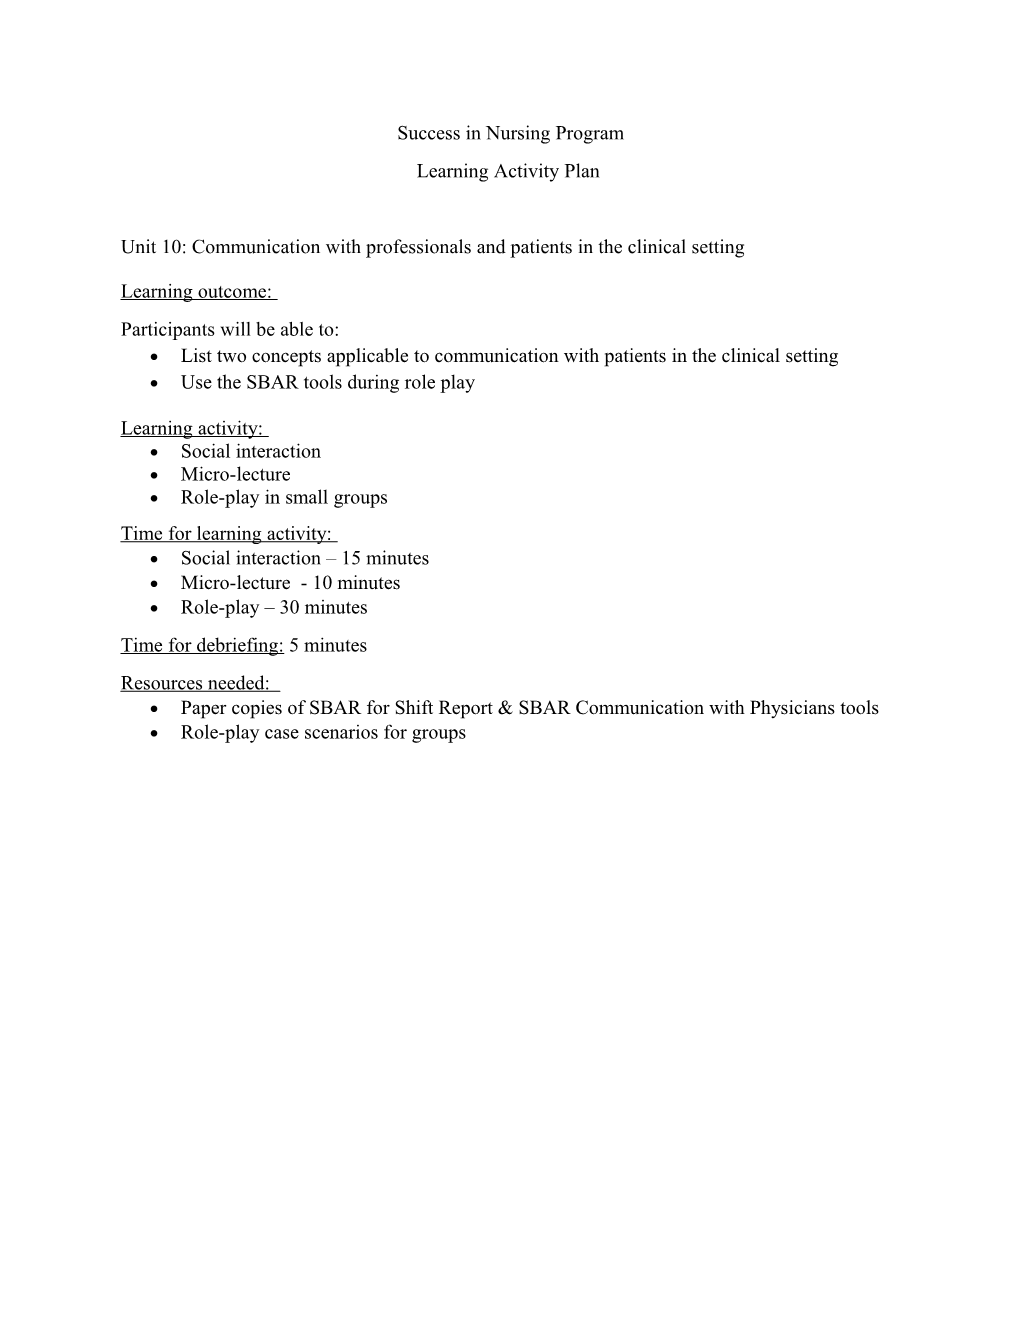 Unit 10: Communication with Professionals and Patients in the Clinical Setting